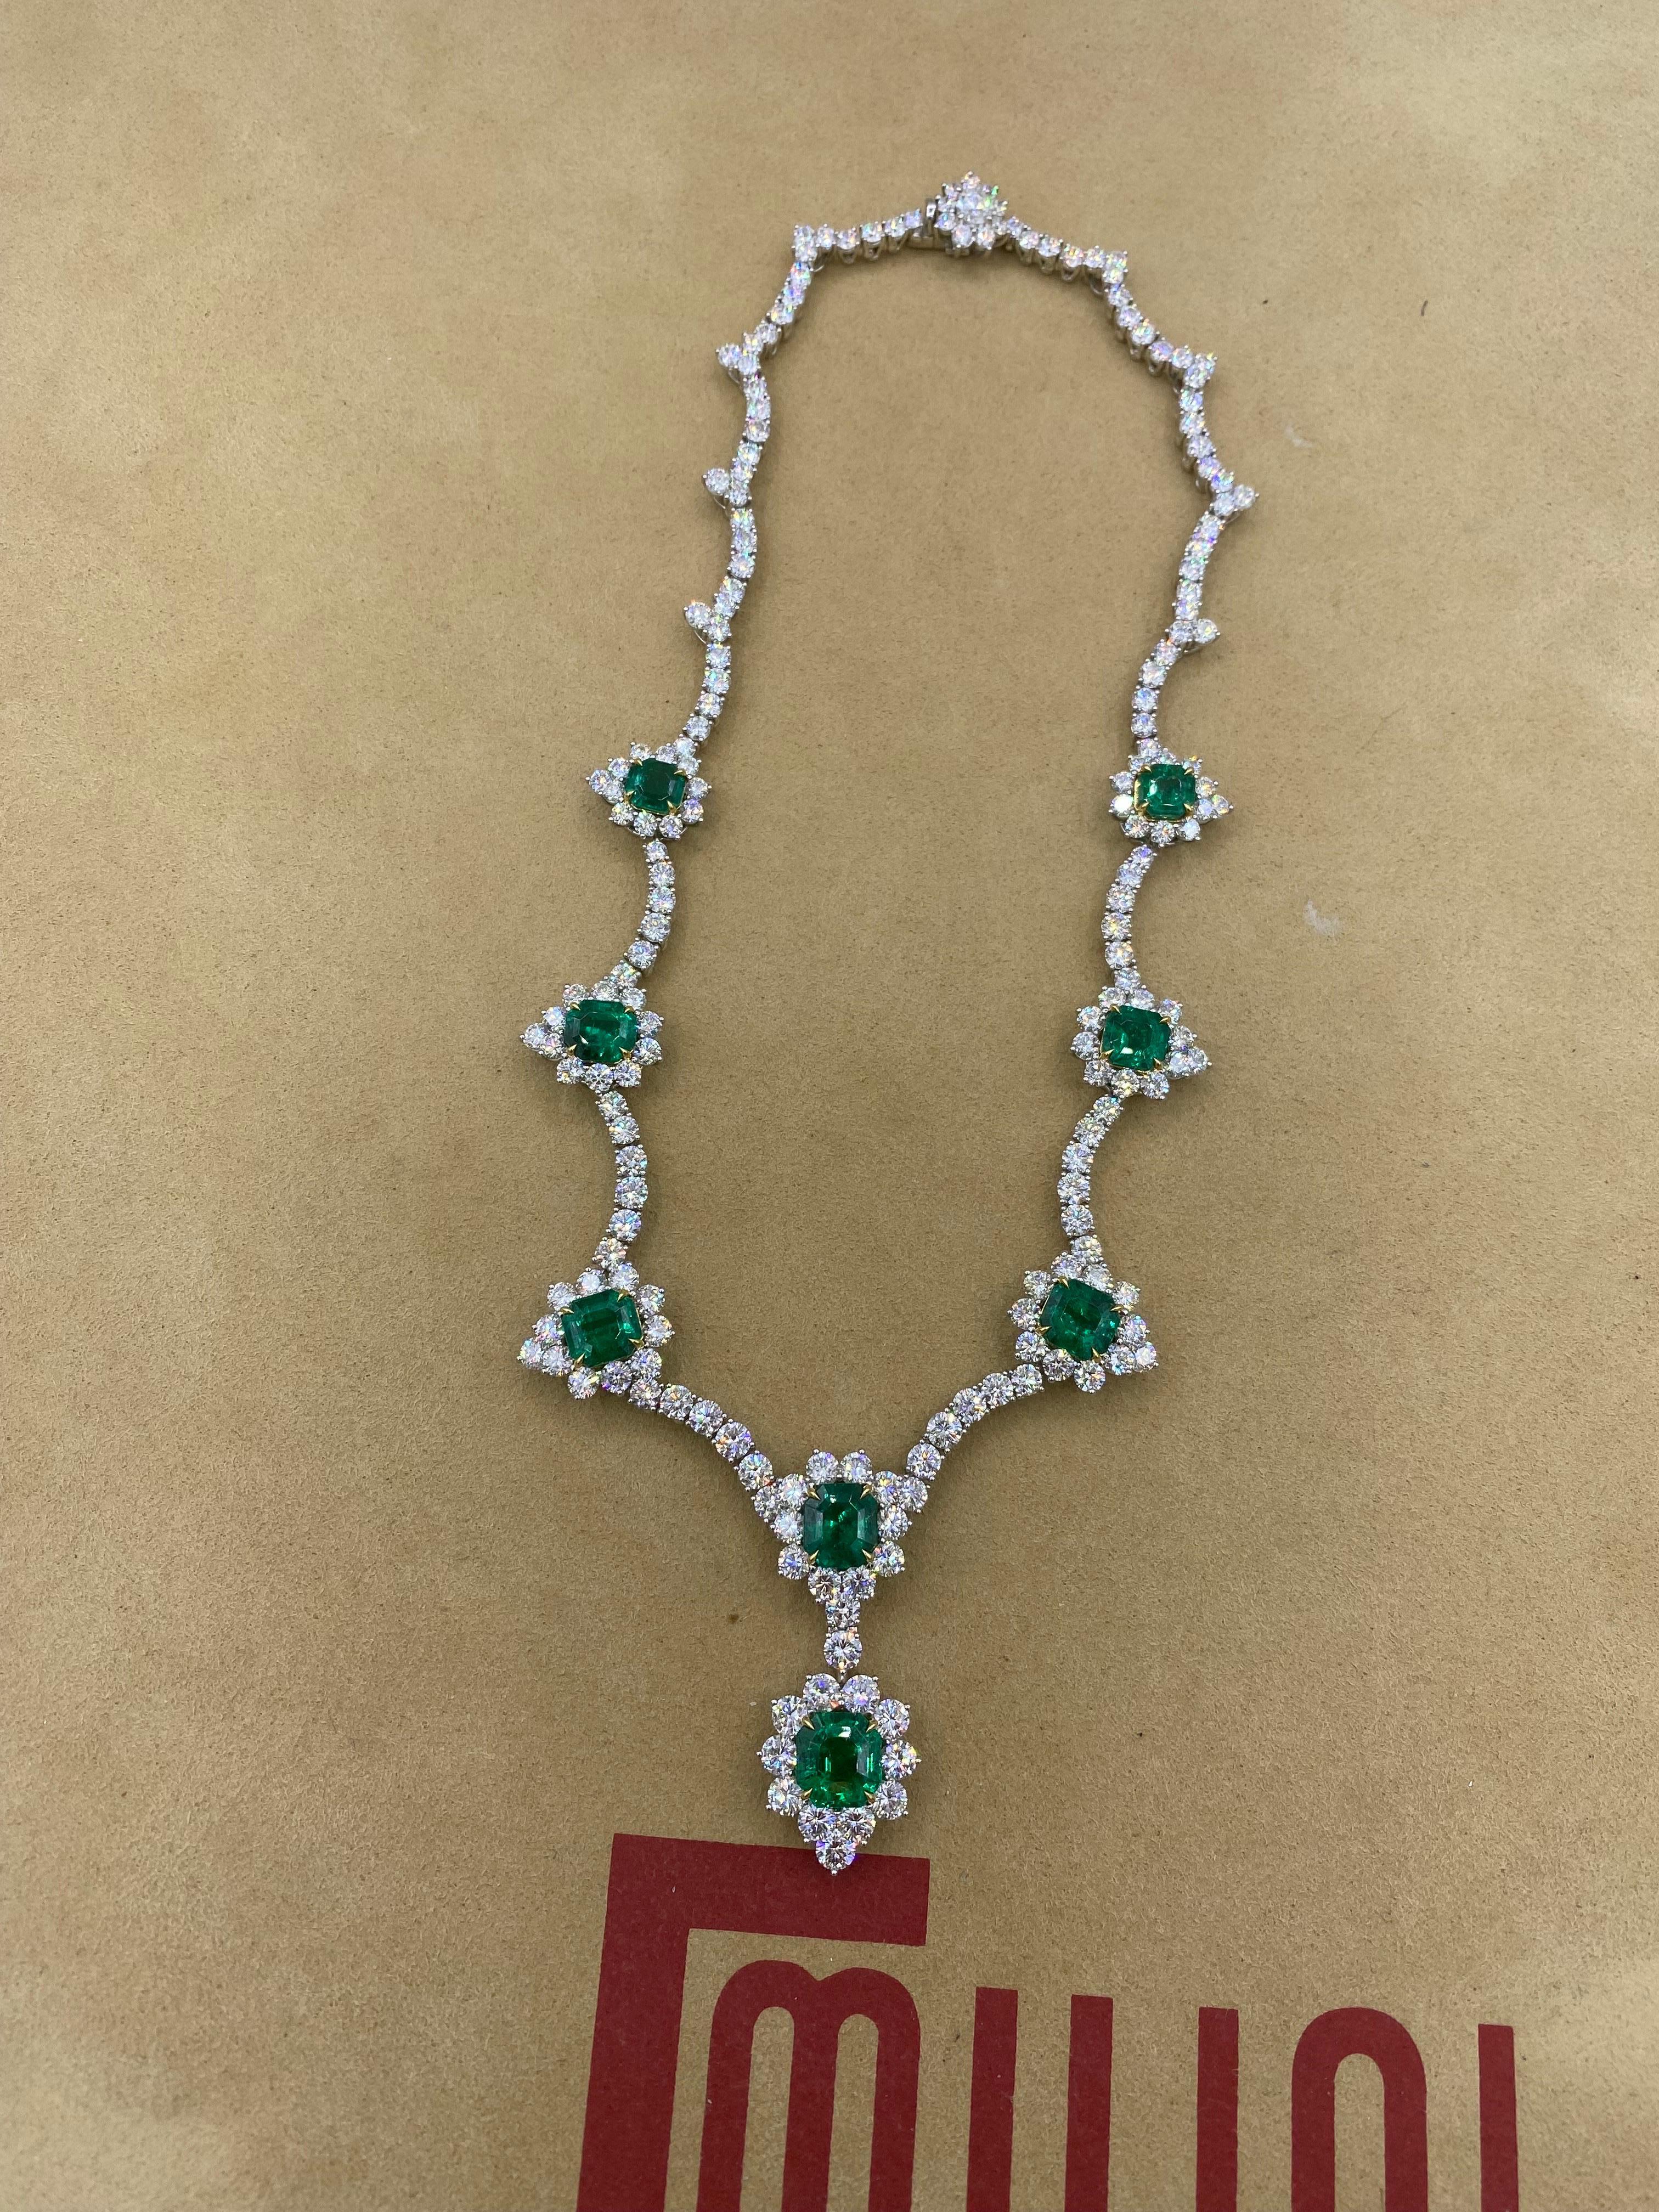 From Emilio Jewelry, a well known and respected wholesaler/dealer located on New York’s iconic Fifth Avenue, 
We picked the finest Muzo Emeralds for this necklace. The best of our collections. Vibrant Vivid Green Emeralds showcasing excellent